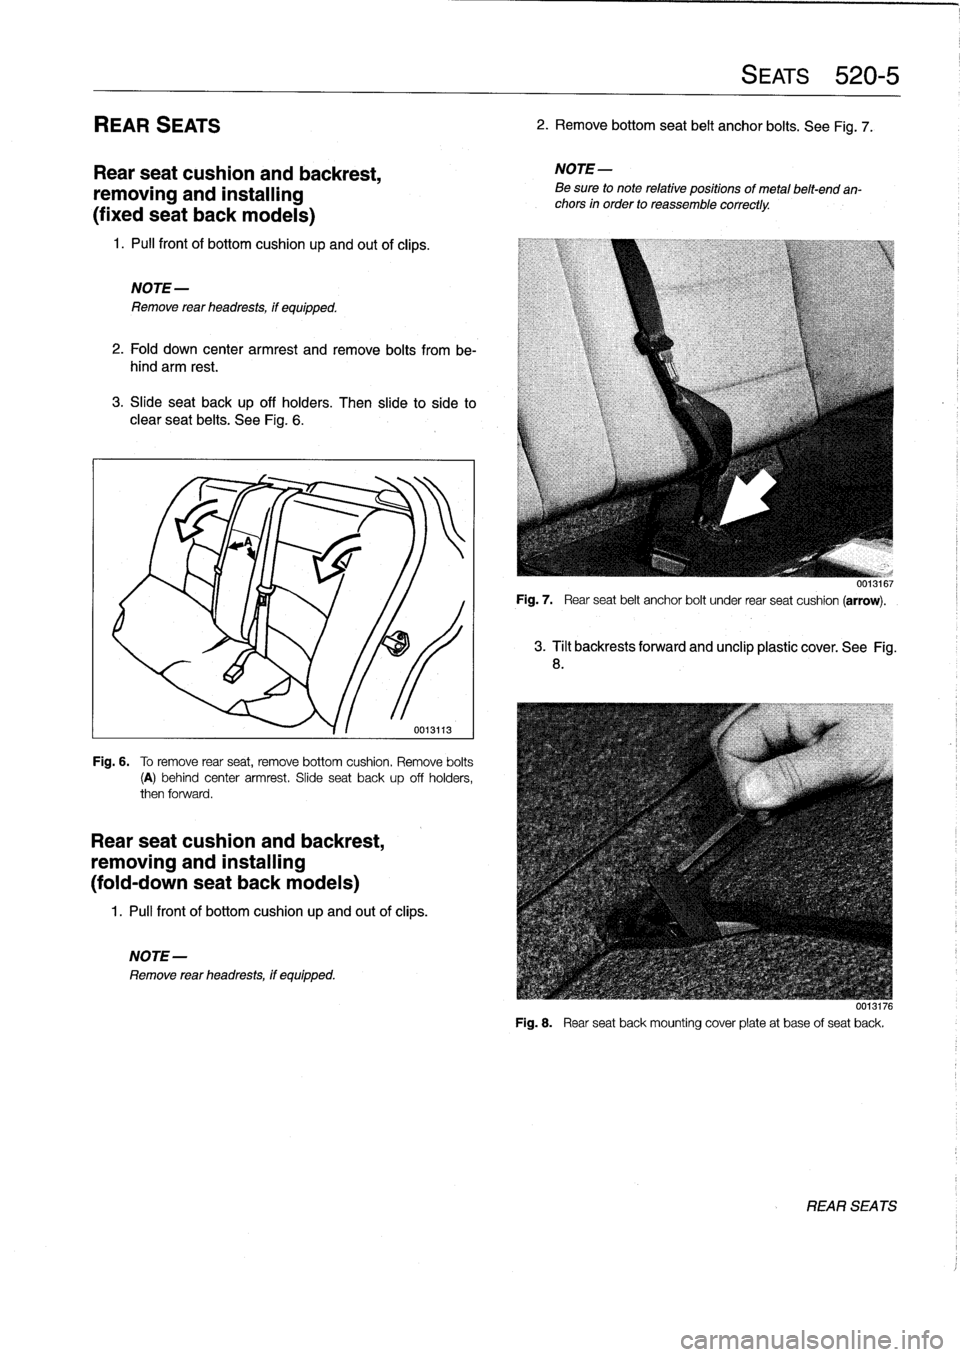 BMW 325i 1994 E36 Workshop Manual 
REAR
SEATS

Rear
seat
cushion
and
backrest,

removing
and
installing

(fixed
seat
back
modeis)

1
.
Pull
front
of
bottomcushion
up
and
out
of
clips
.

NOTE-

Remove
rear
headrests,
if
equipped
.

2
.